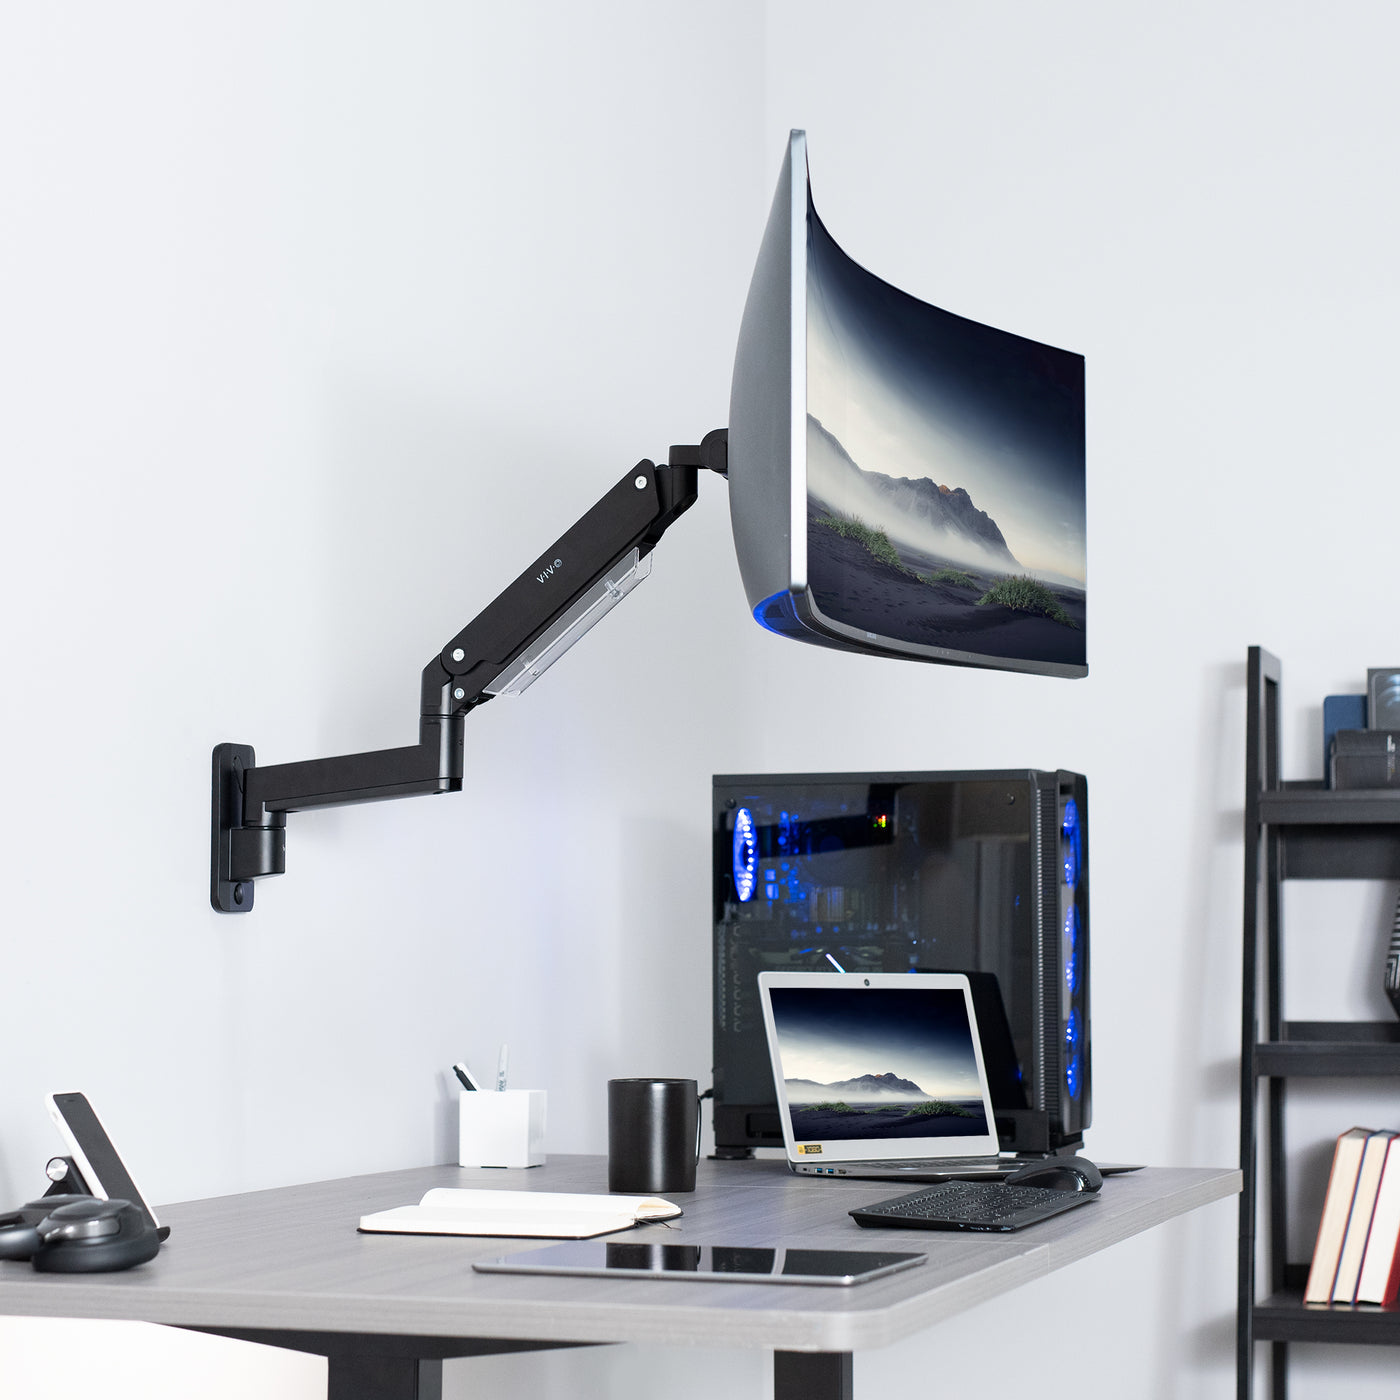 Premium Aluminum Heavy Duty Monitor Arm for Ultrawide Screens up to 49 inches and 44 lbs